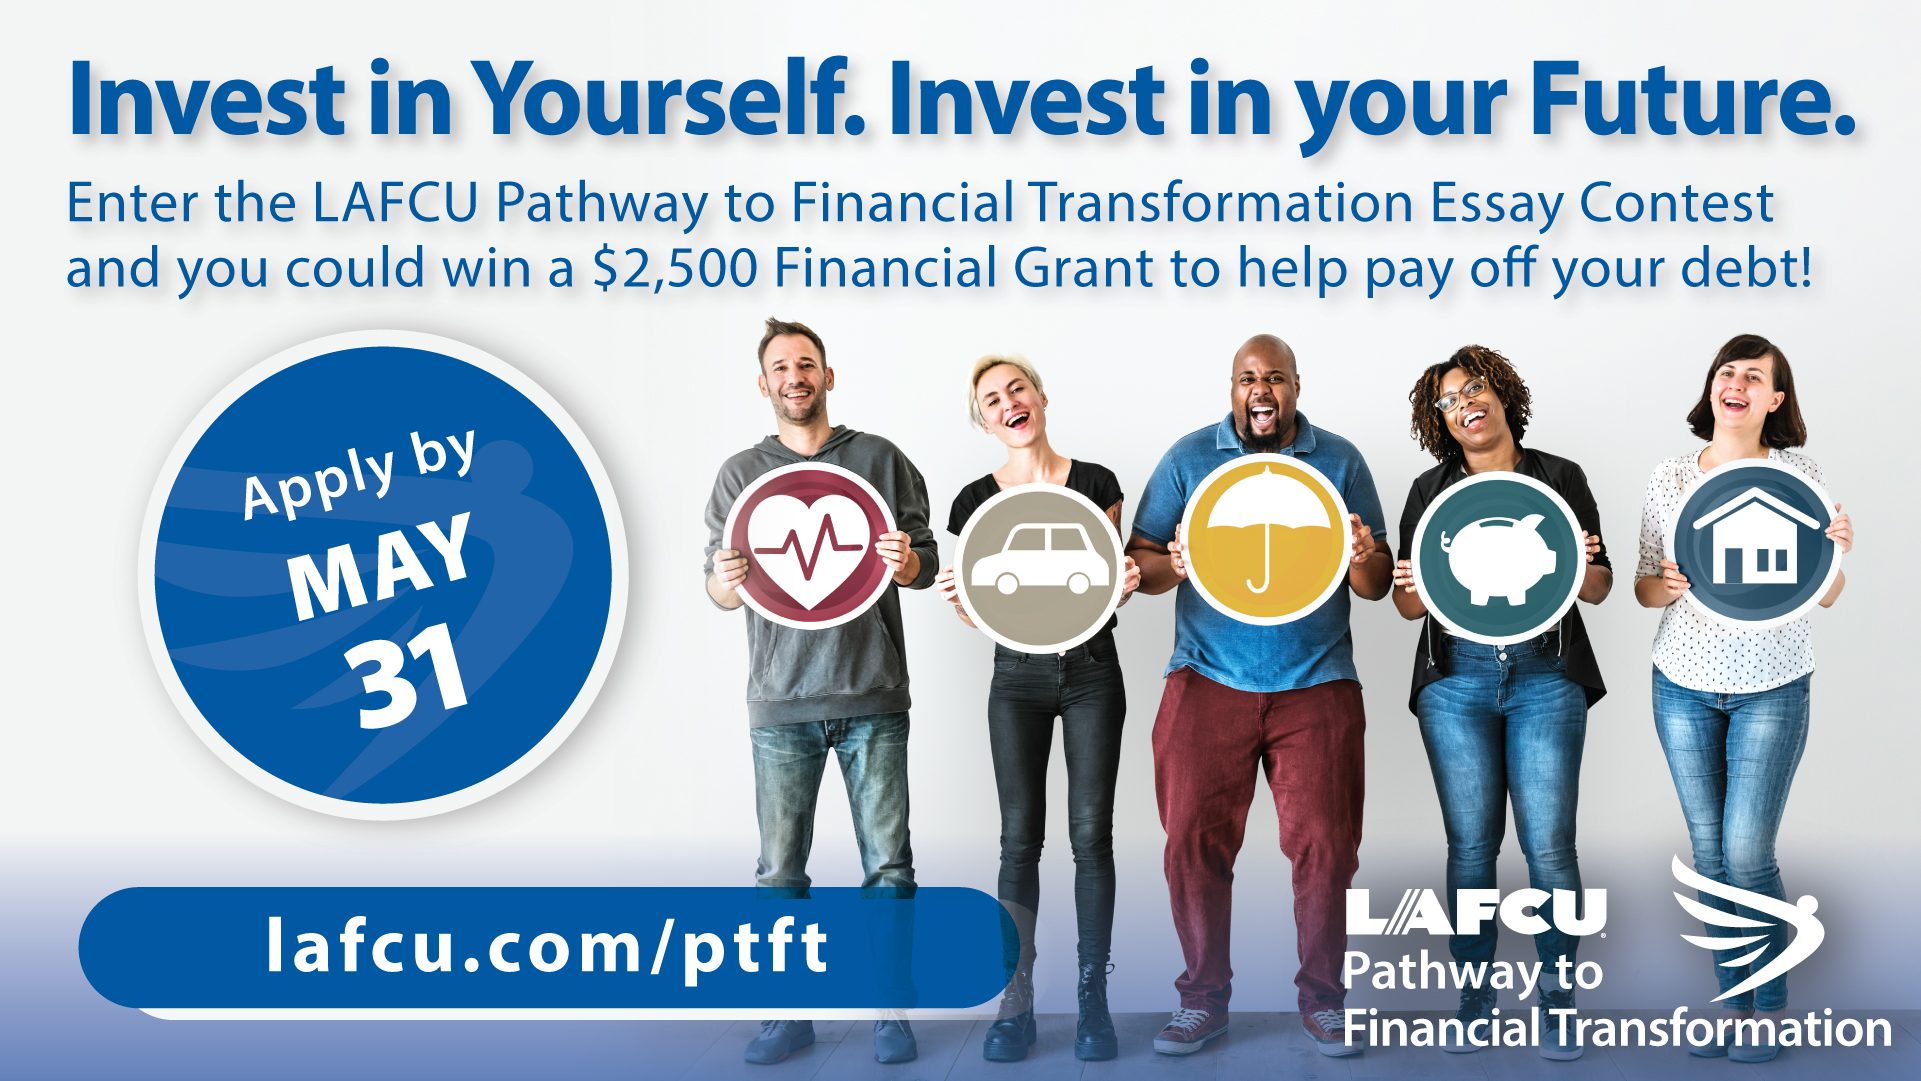 LAFCU Pathway to Financial Transformation Essay Contest